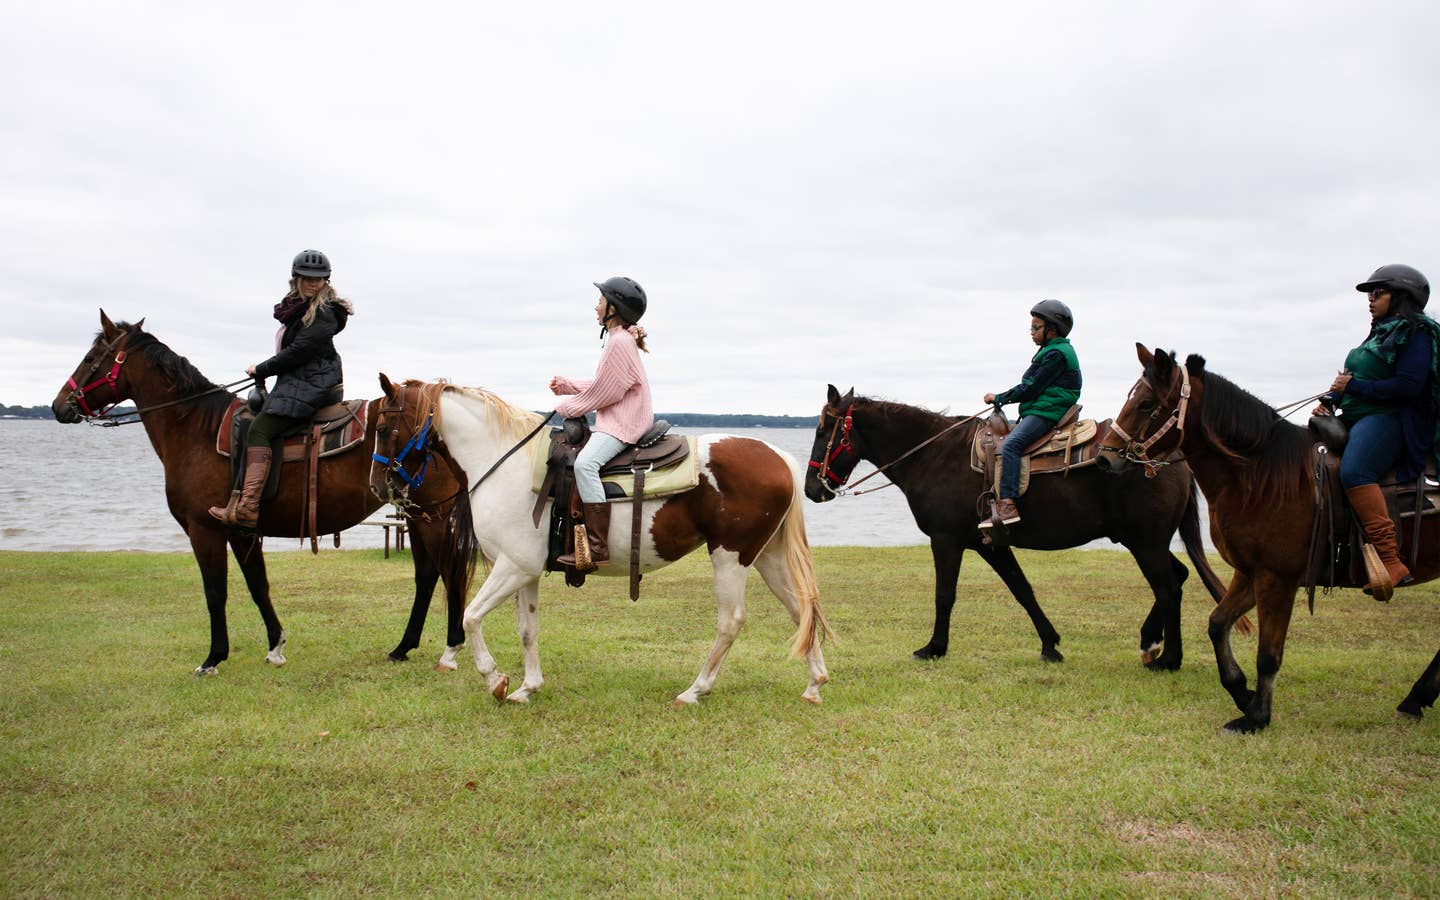 Group of three people riding horses at Villages Resort in Flint, Texas.